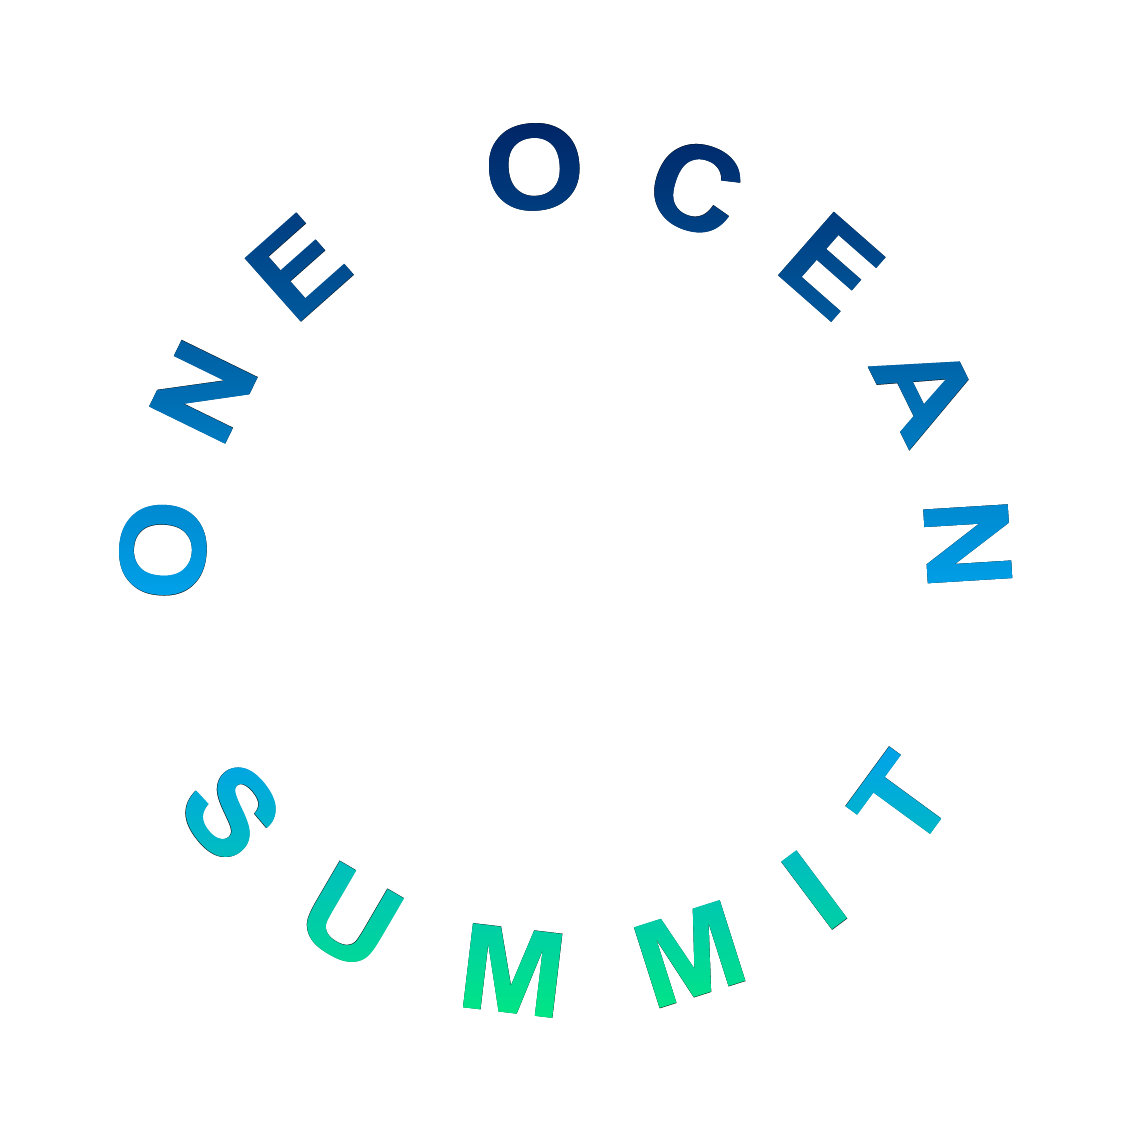 Falco was present at the One Ocean Summit